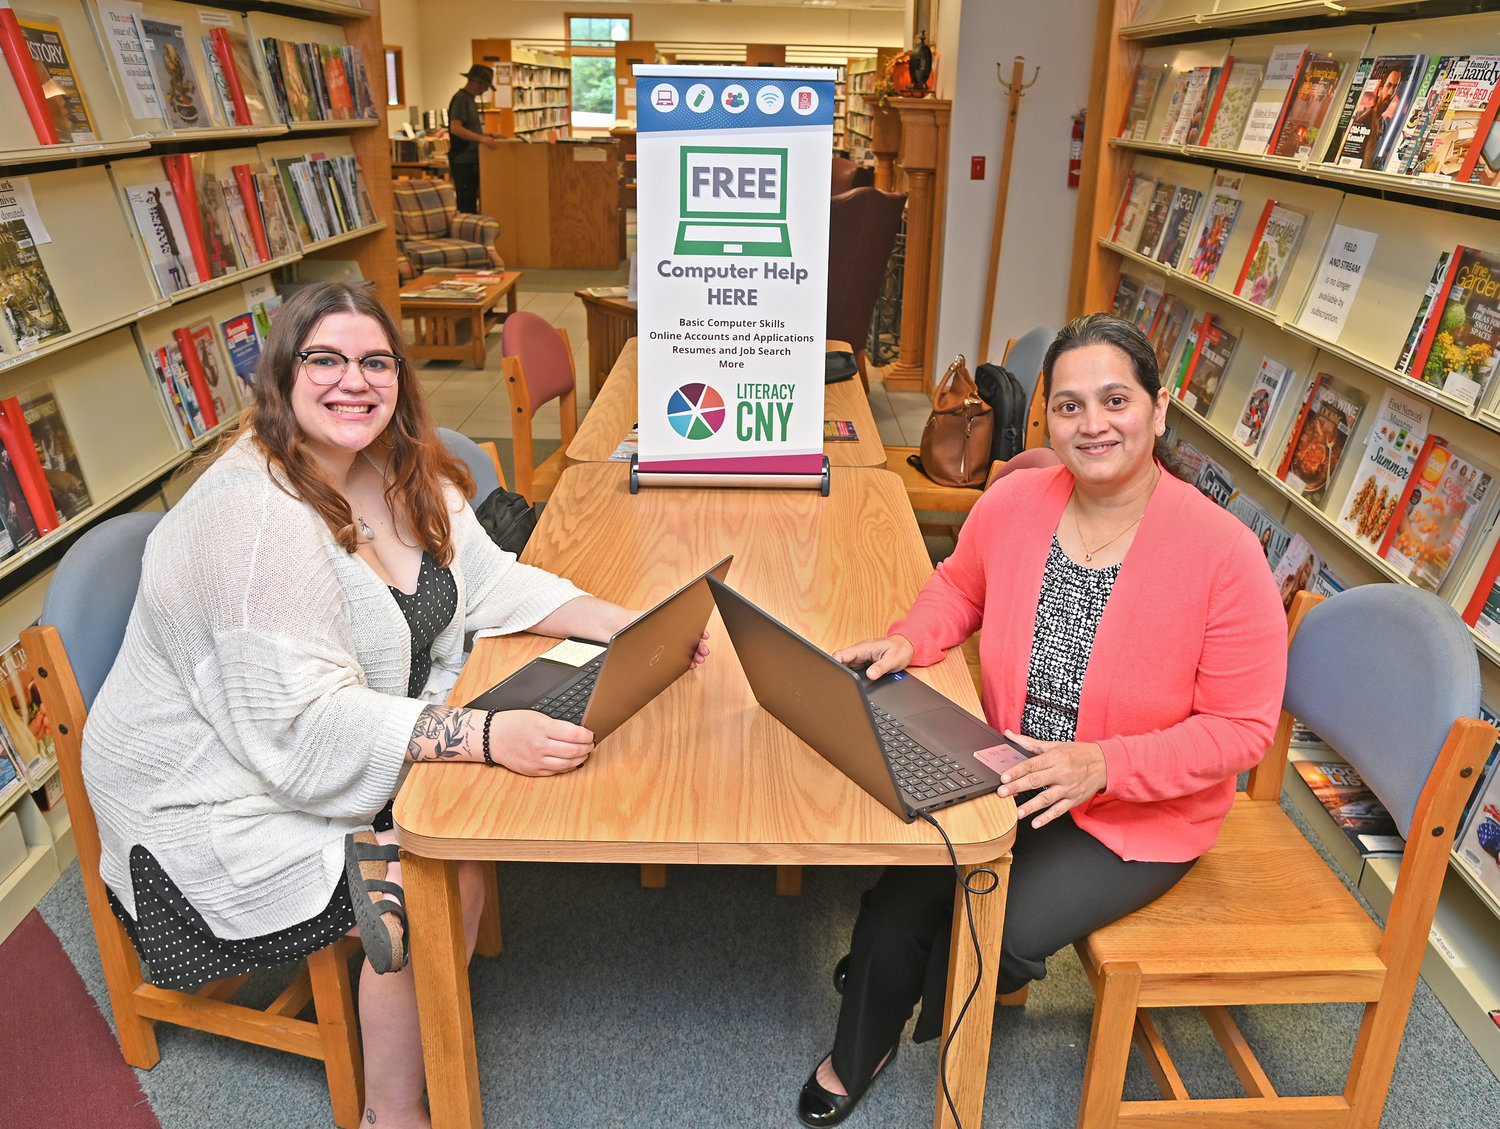 Volunteers offer free computer help at New Hartford library